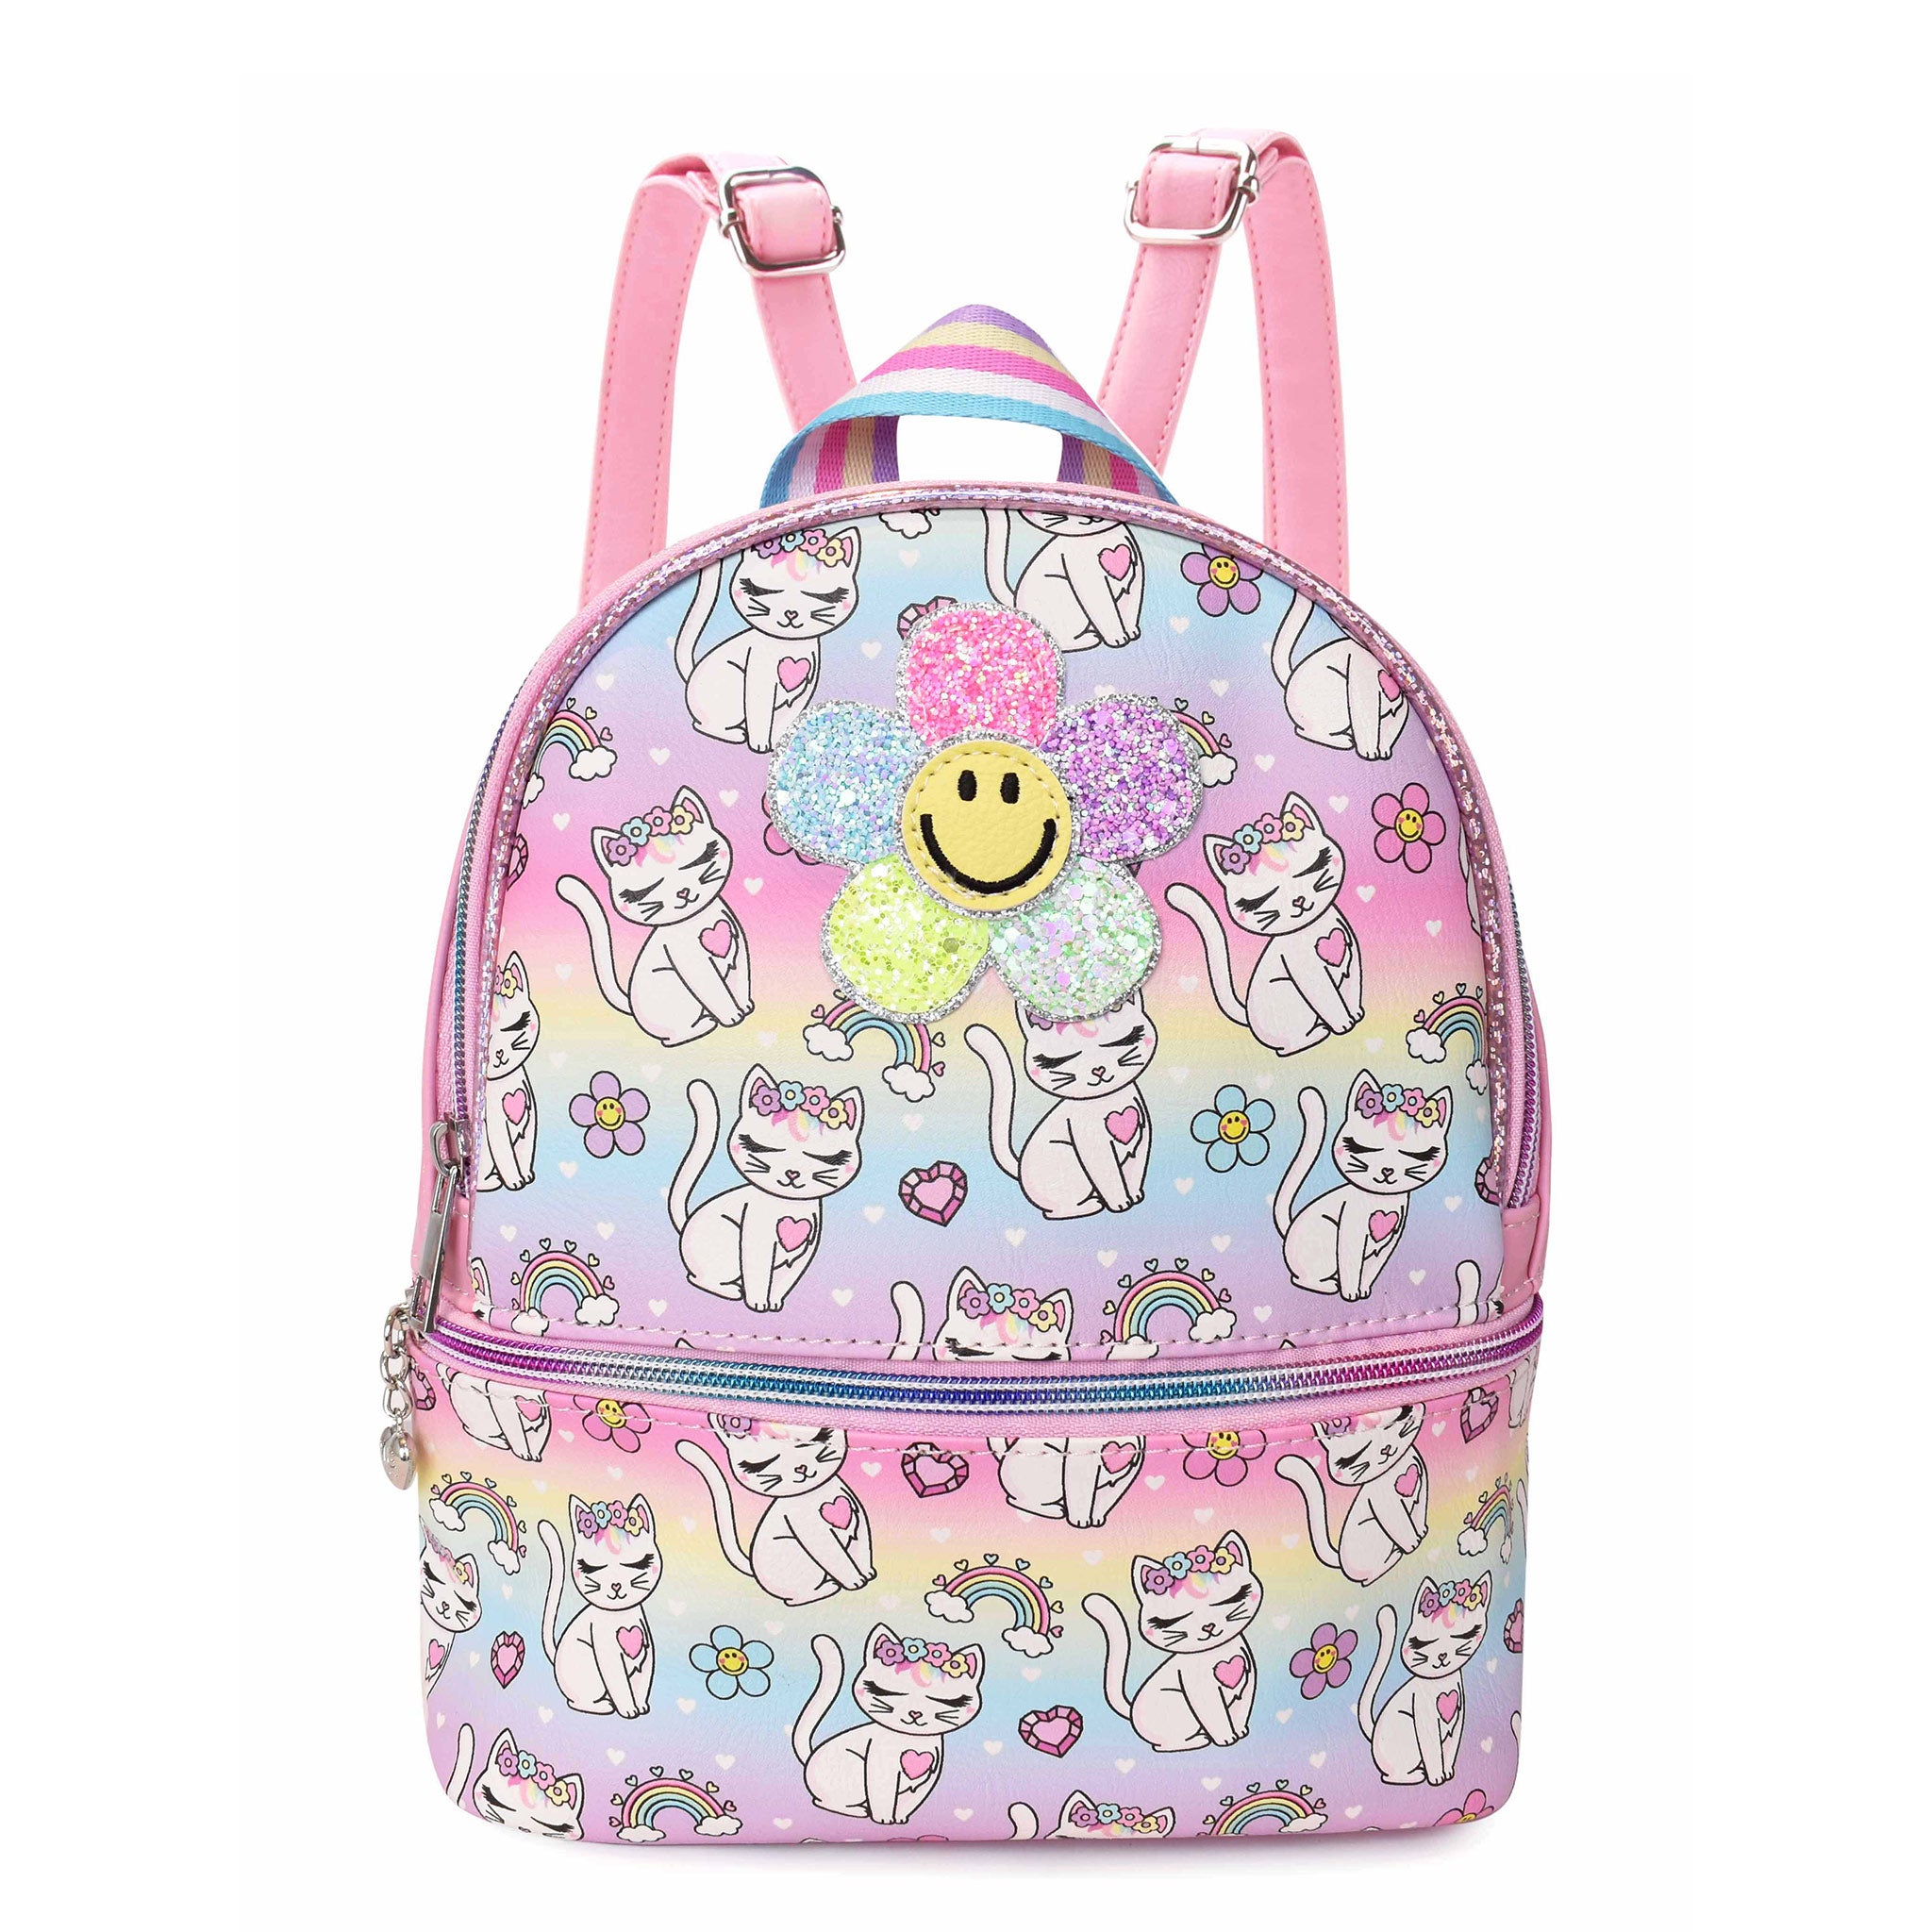 Front view of a kitty cat and rainbow printed mini backpack with a glitter smiley face daisy appliqué 